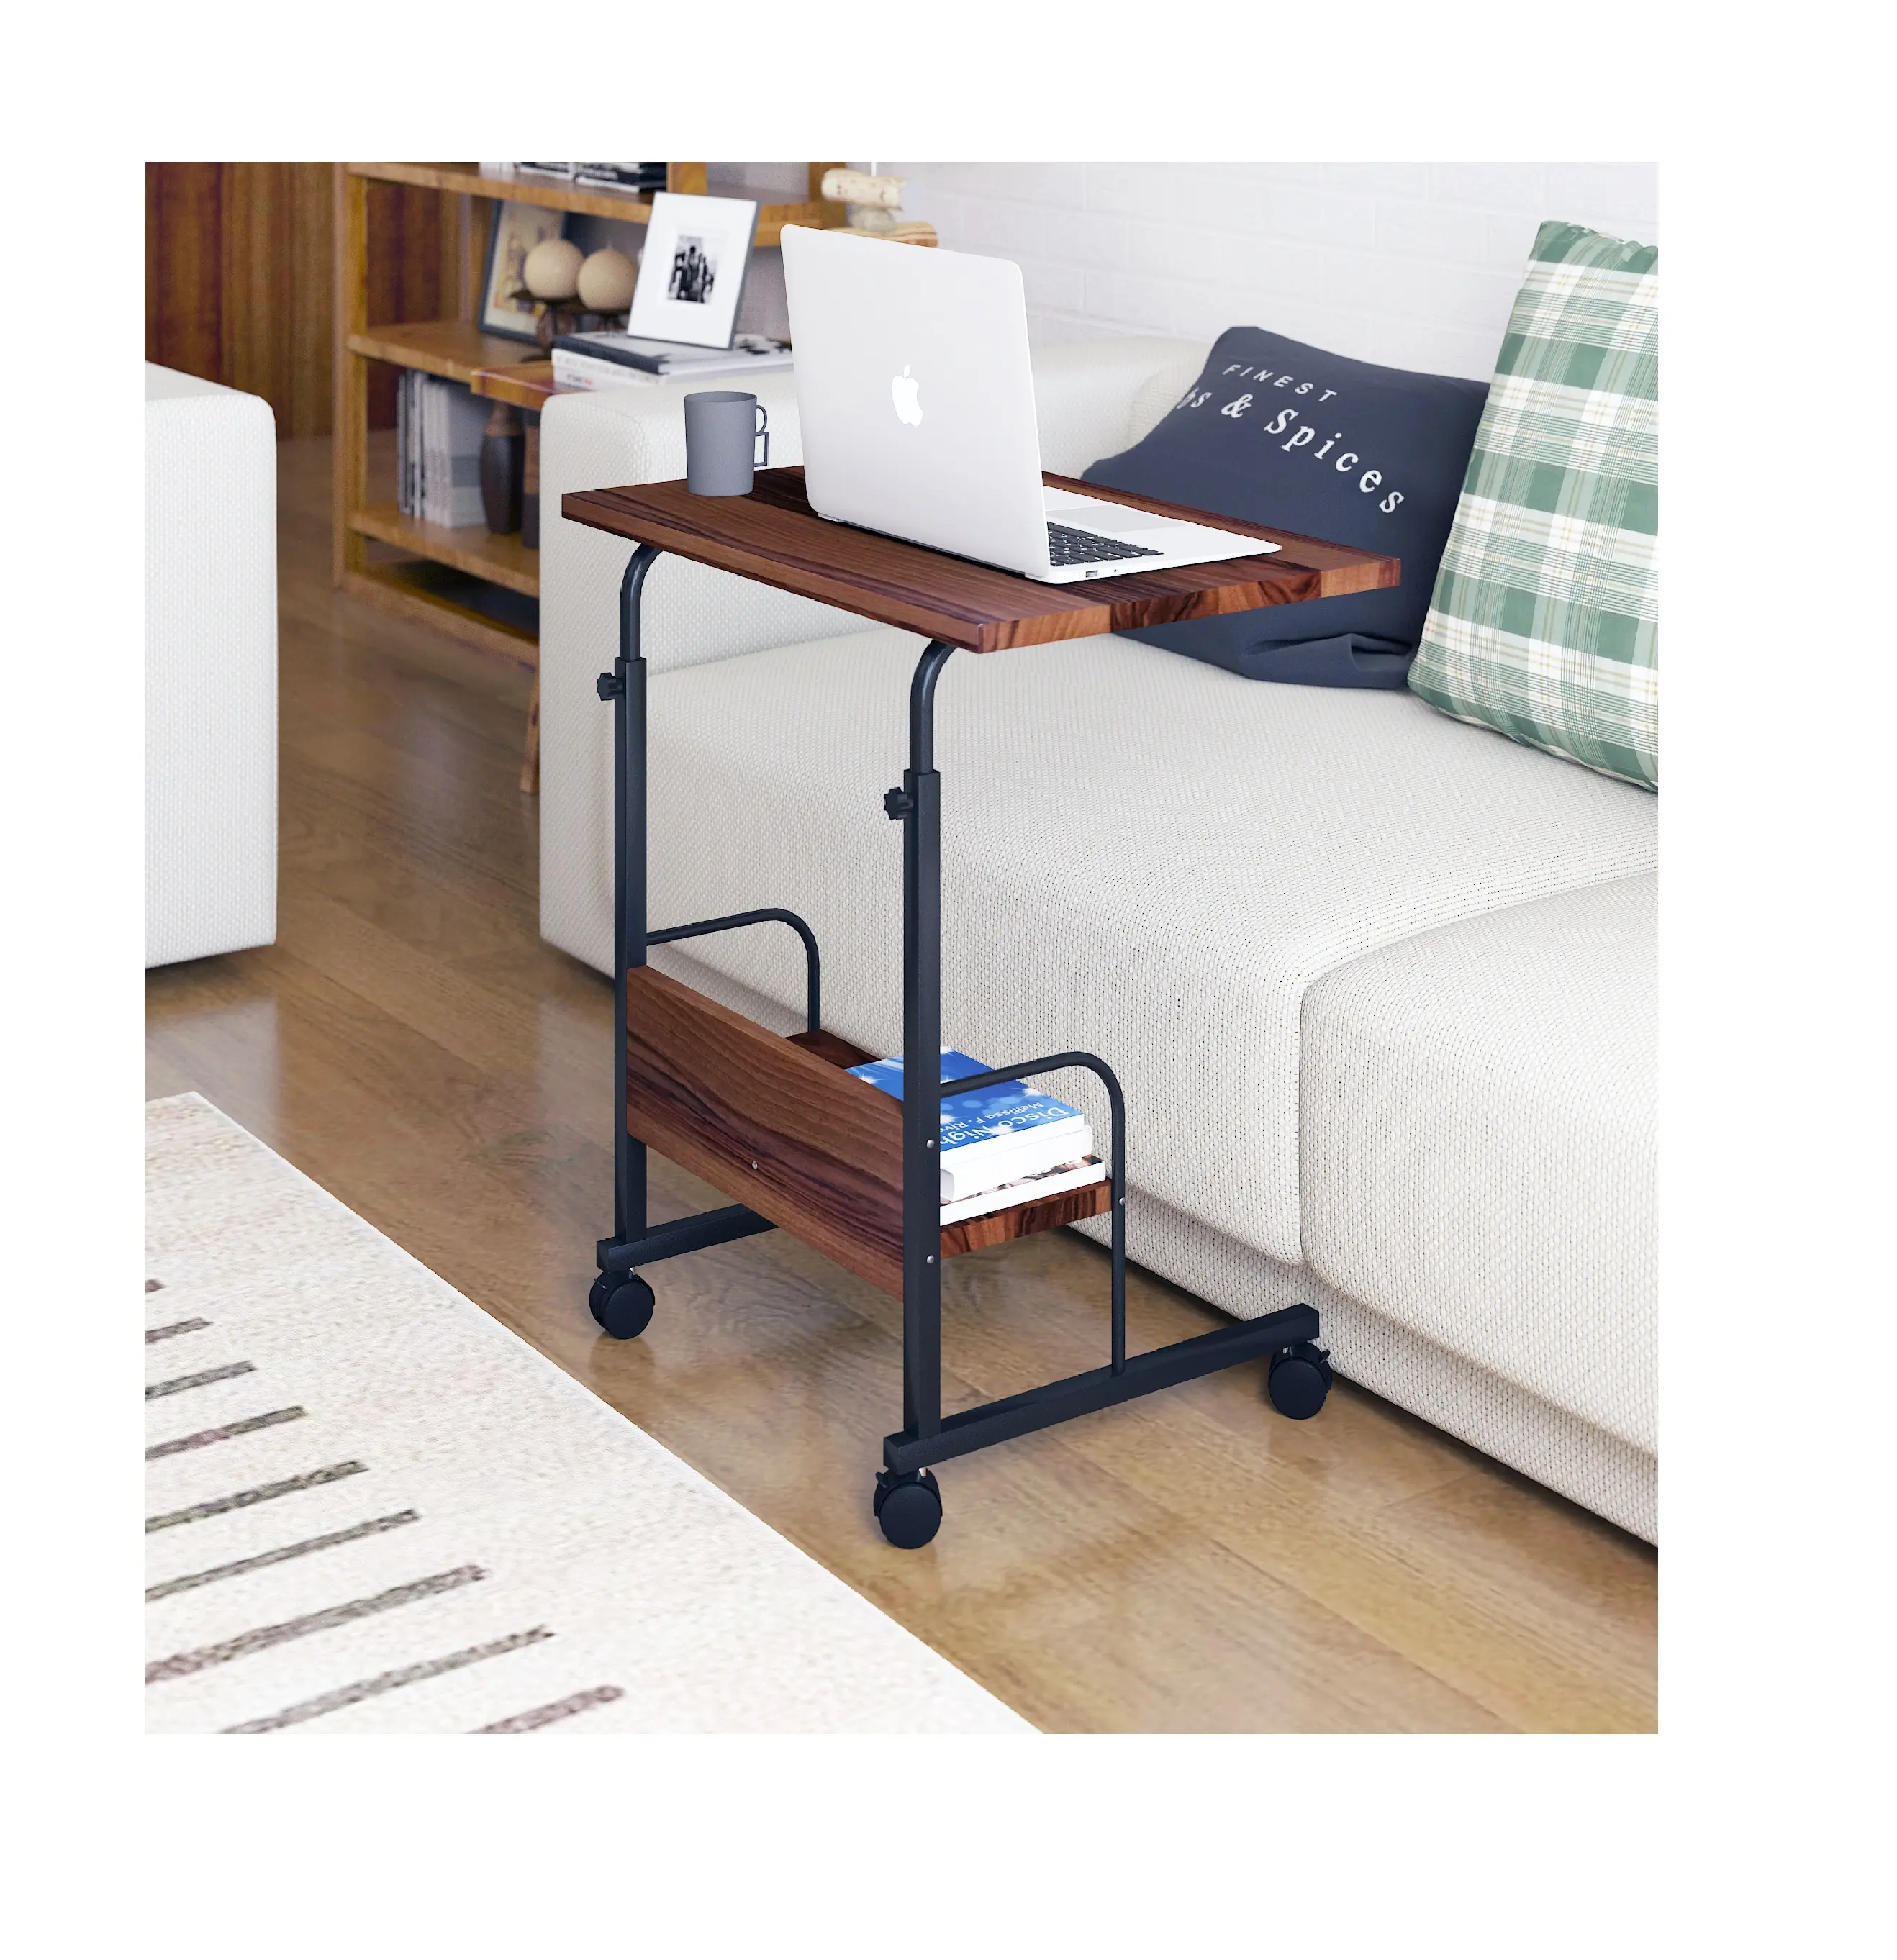 Amazon Best Seller Europe Lockable Wheeled Portable Laptop Stand and Desk with Height Adjustable Shelves Notebook Stand